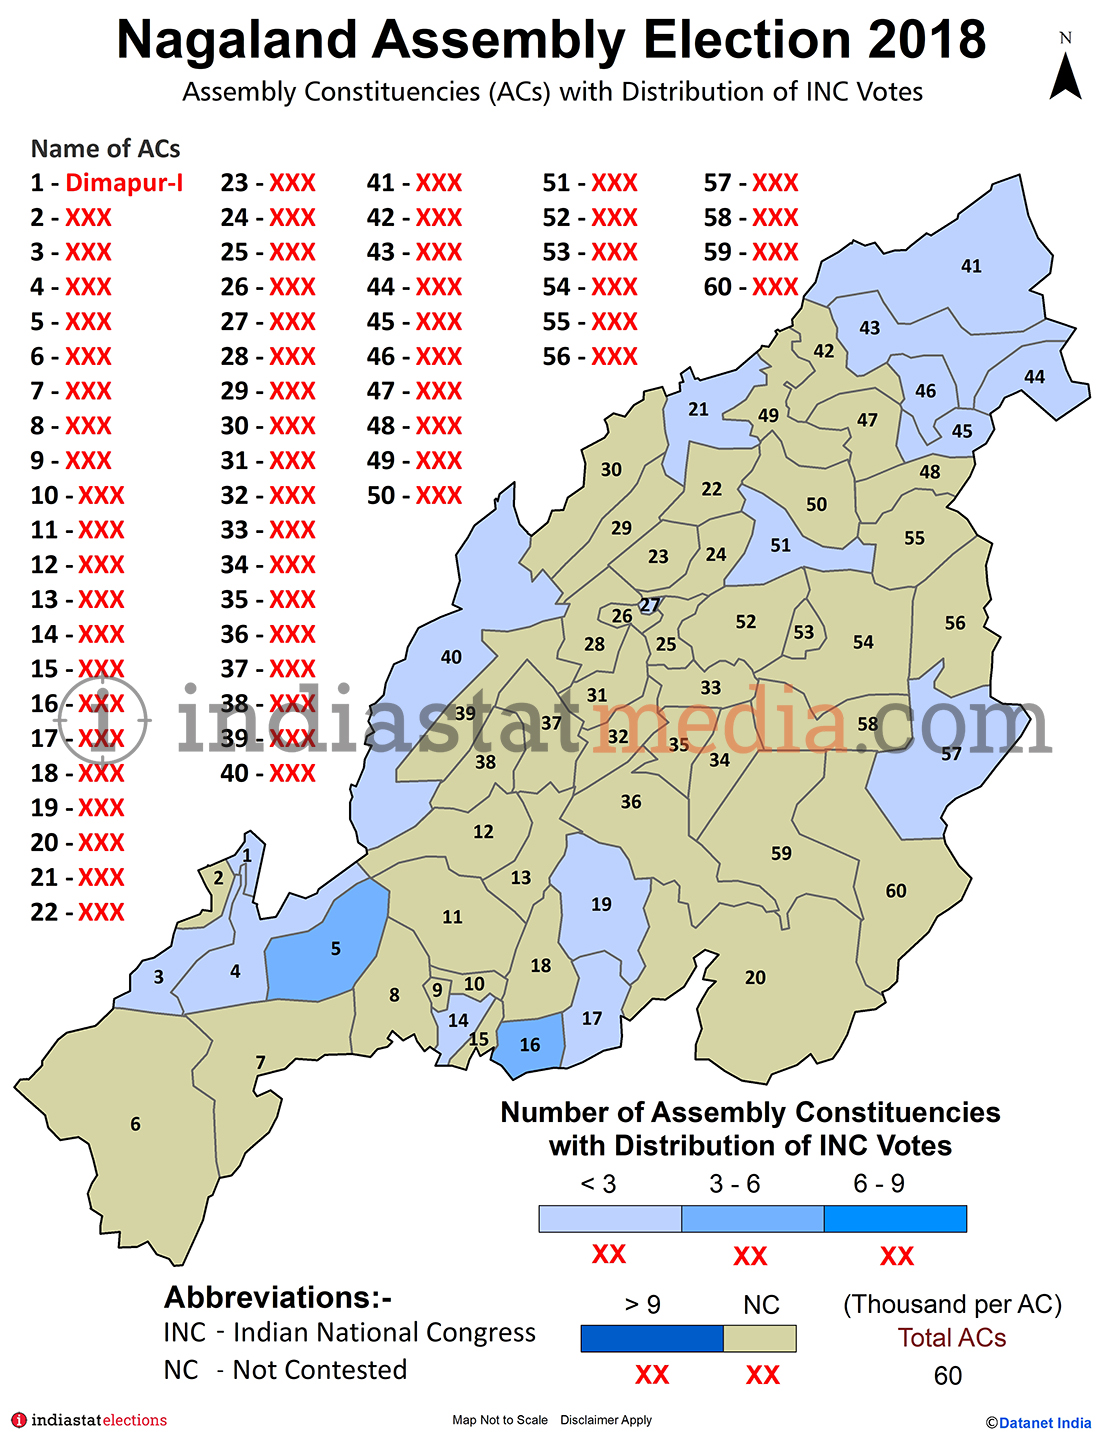 Distribution of INC Votes by Constituencies in Nagaland (Assembly Election - 2018)